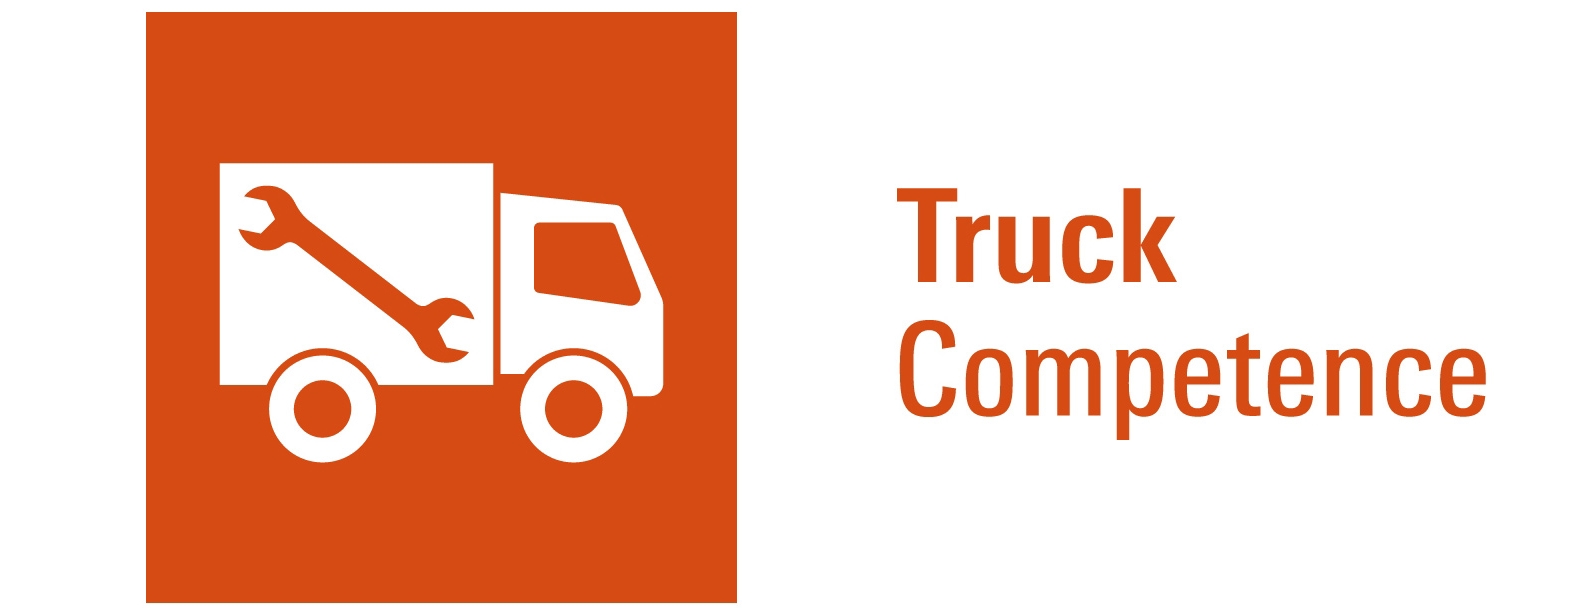 Truck Competence